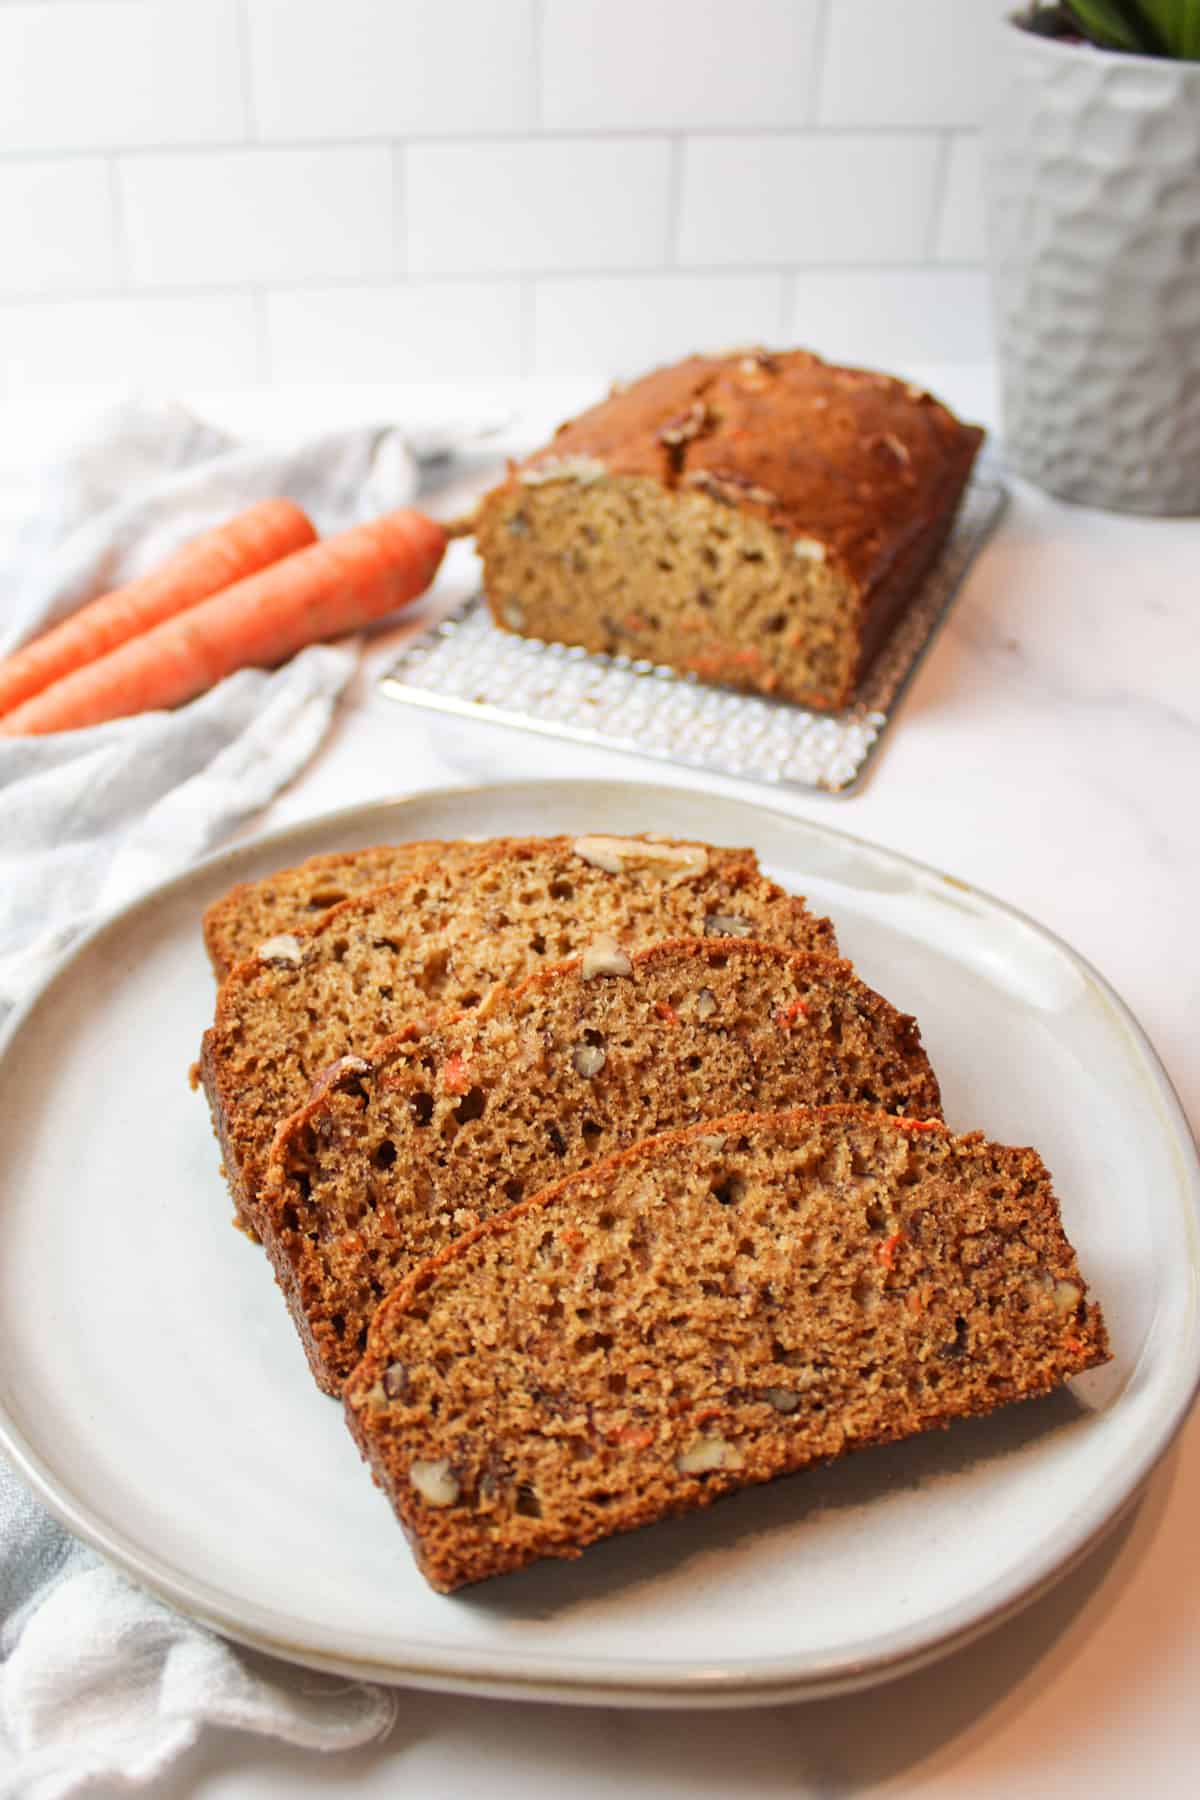 sliced carrot cake banana bread on a plate with carrots and more bread in background